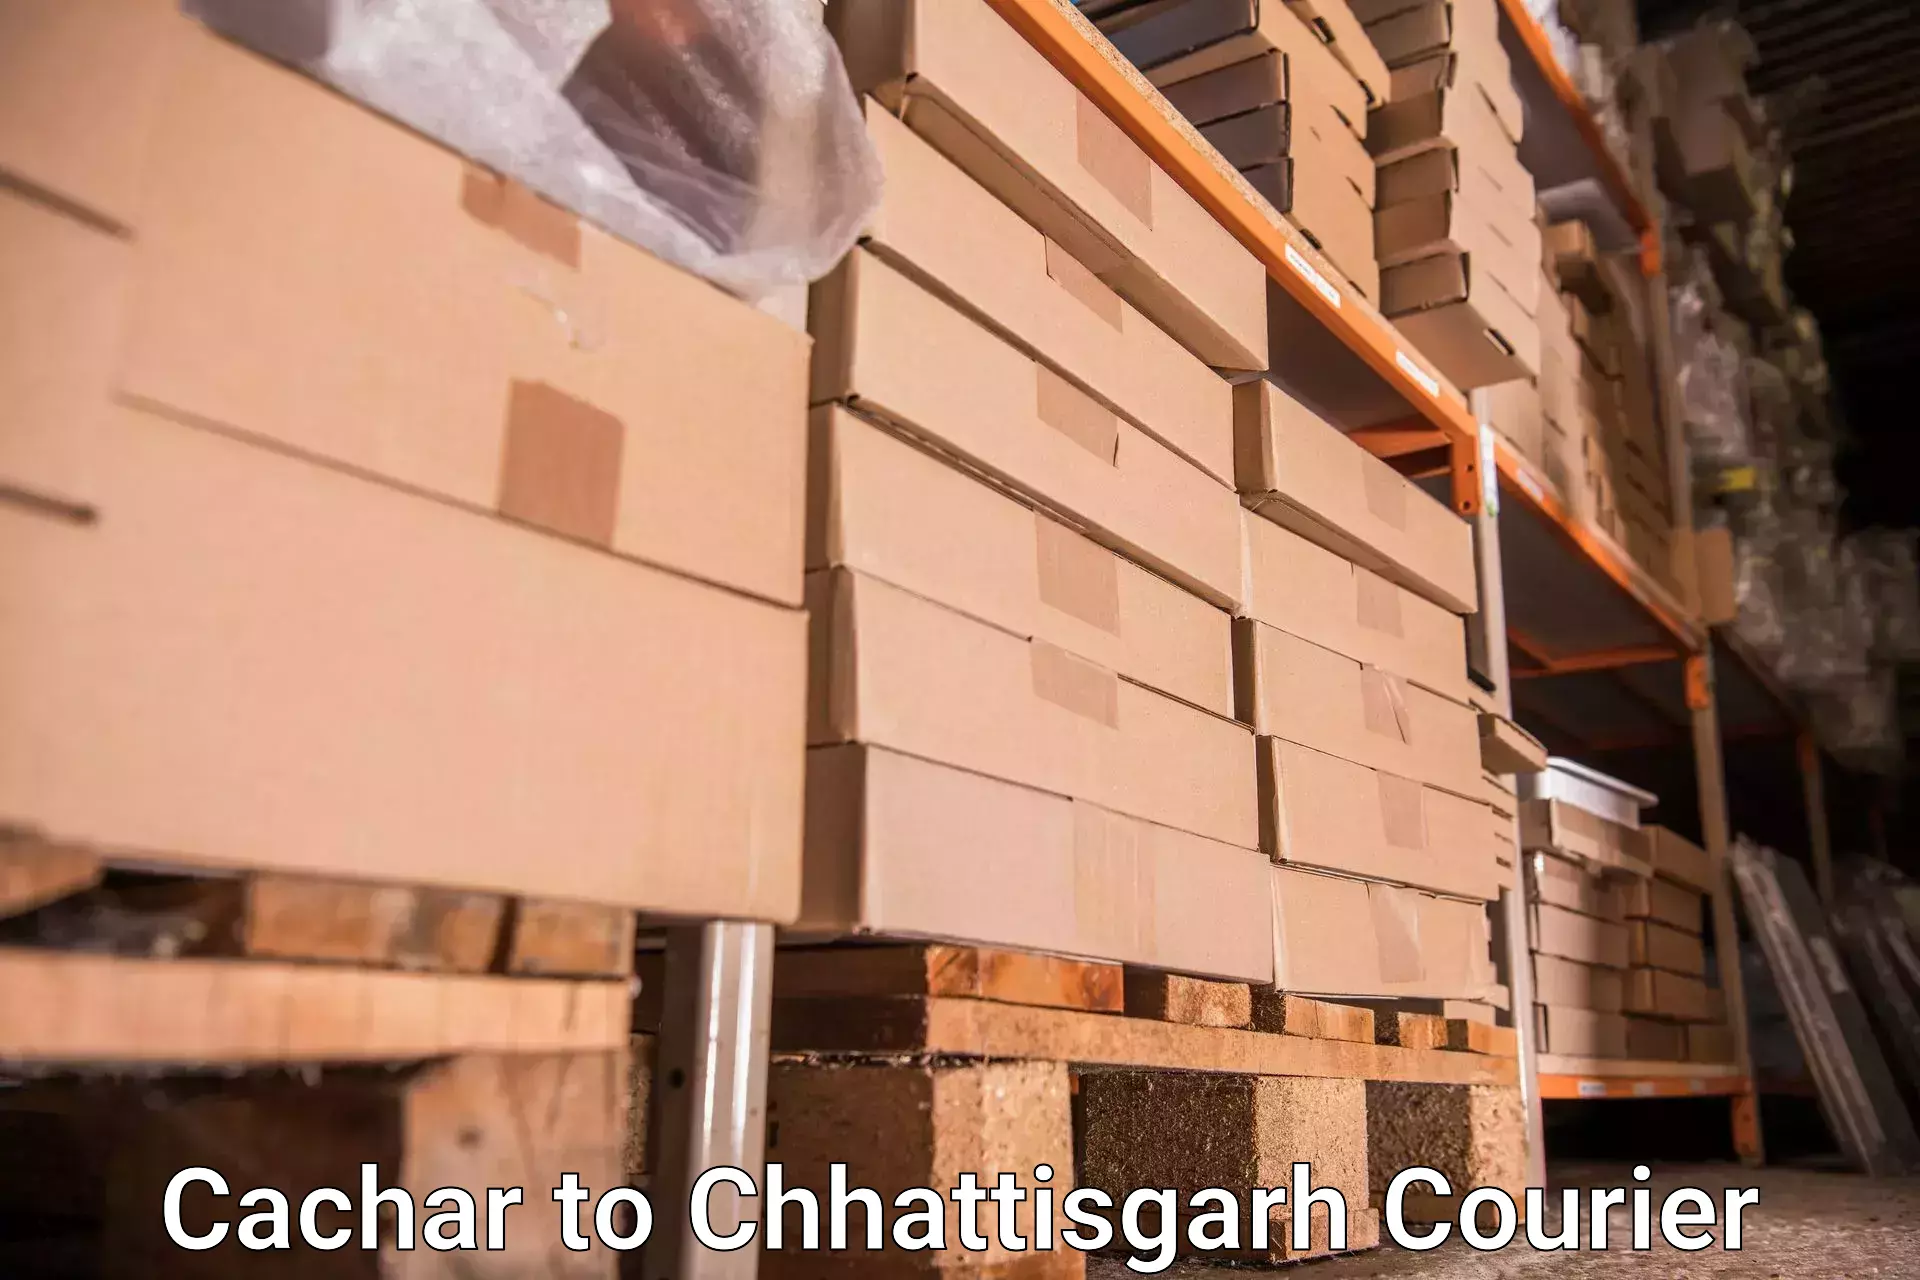 Hotel to Door baggage transport Cachar to Raigarh